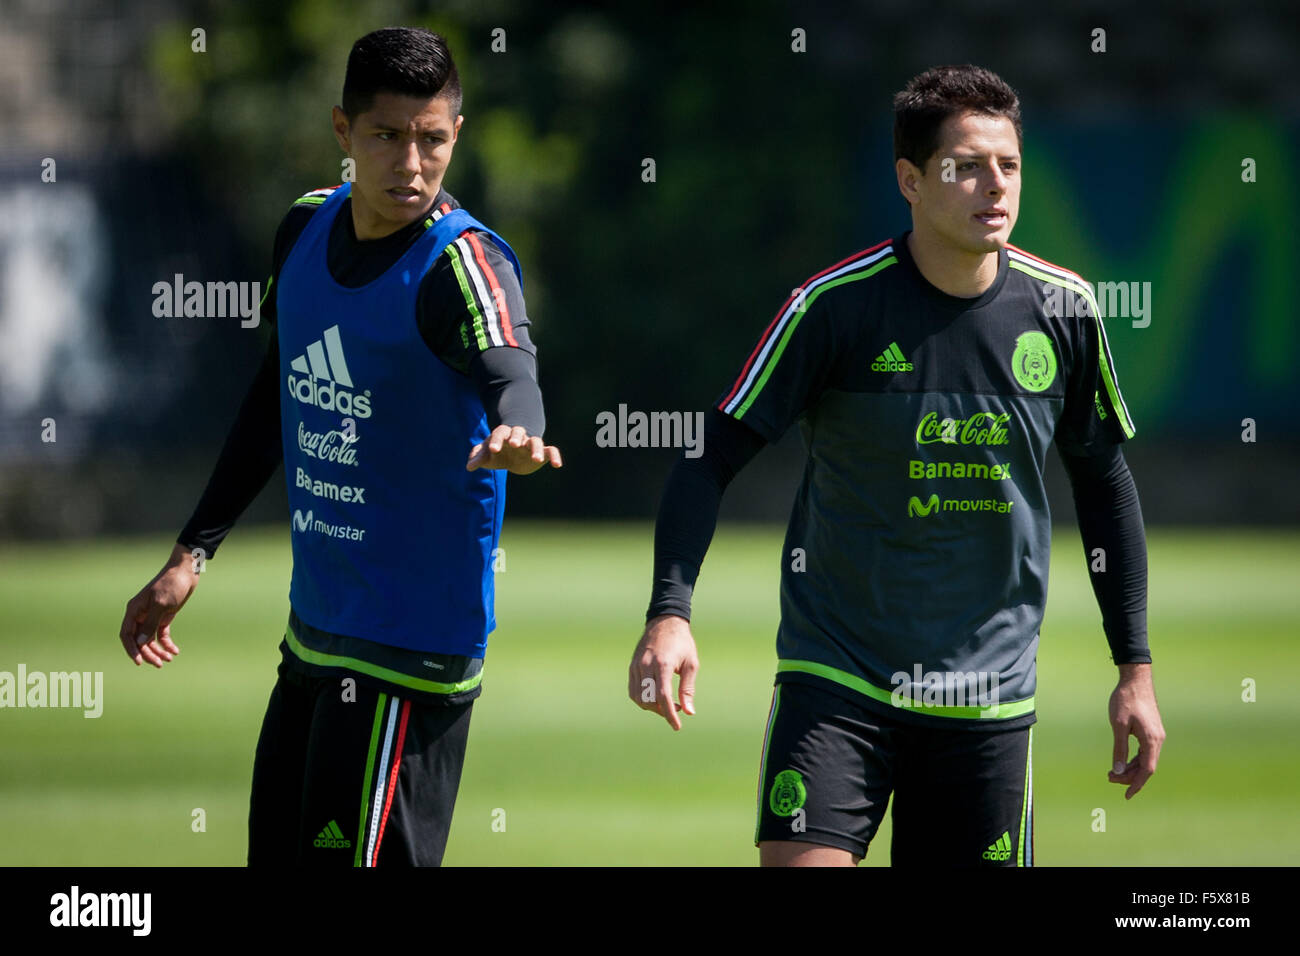 Mexico City, Mexico. 9th Nov, 2015. Mexico's national soccer team players Javier Hernandez (R) and Hugo Ayala take part in a training session in Mexico City, capital of Mexico, on Nov. 9, 2015. Mexico will play against El Salvador on Nov. 13, as part of the preliminary competition towards 2018 FIFA World Cup. © Pedro Mera/Xinhua/Alamy Live News Stock Photo